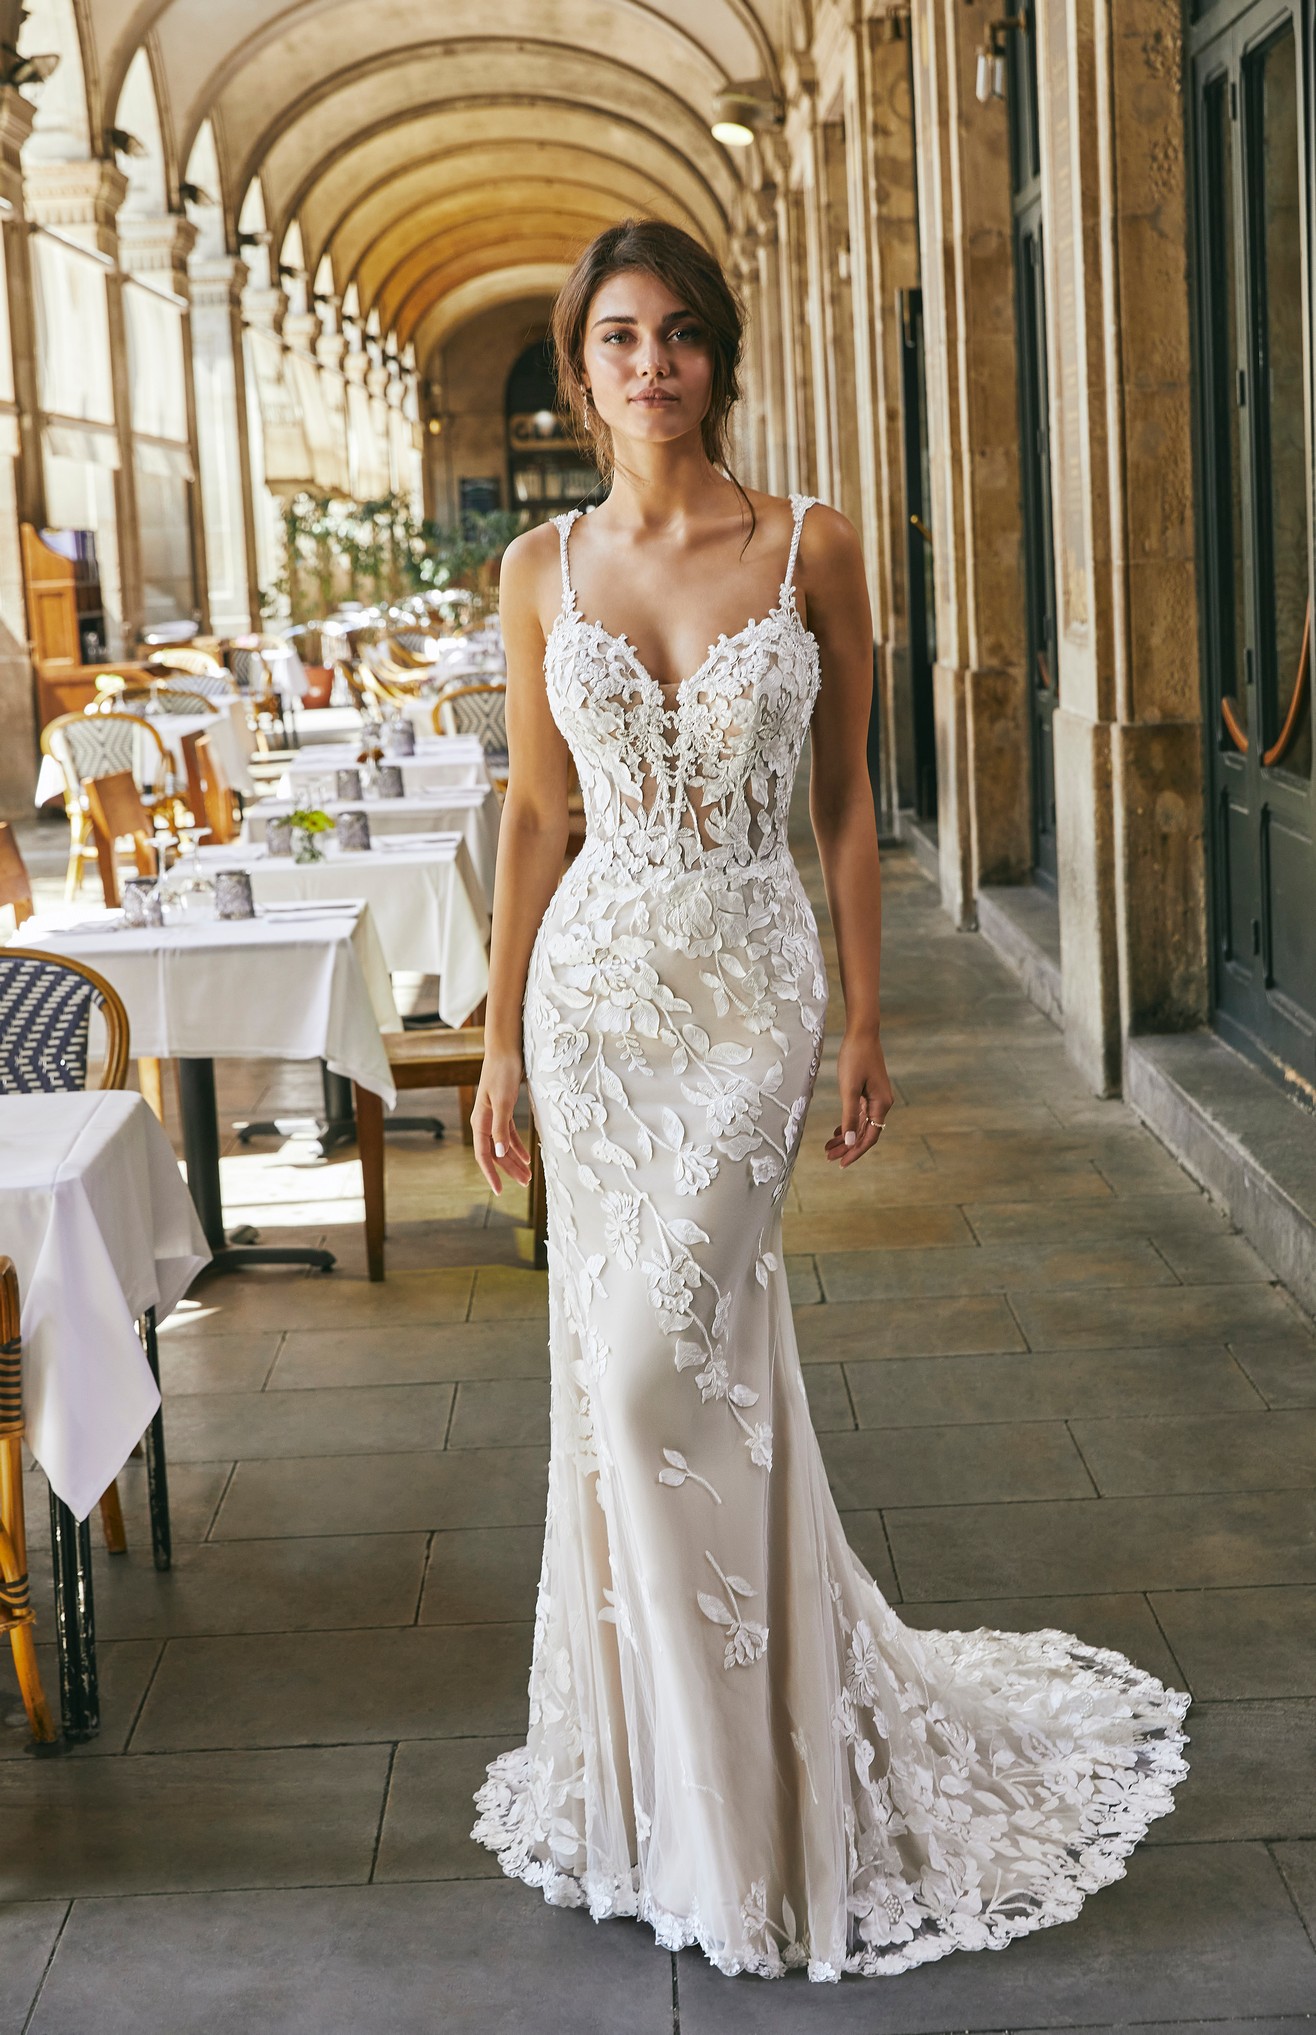 Model stood outside an Italian restaurant in Ronald Joyce style 69718, a sexy fit and flare wedding dress with a lace illusion bodice, sweetheart neckline and delicate beaded straps